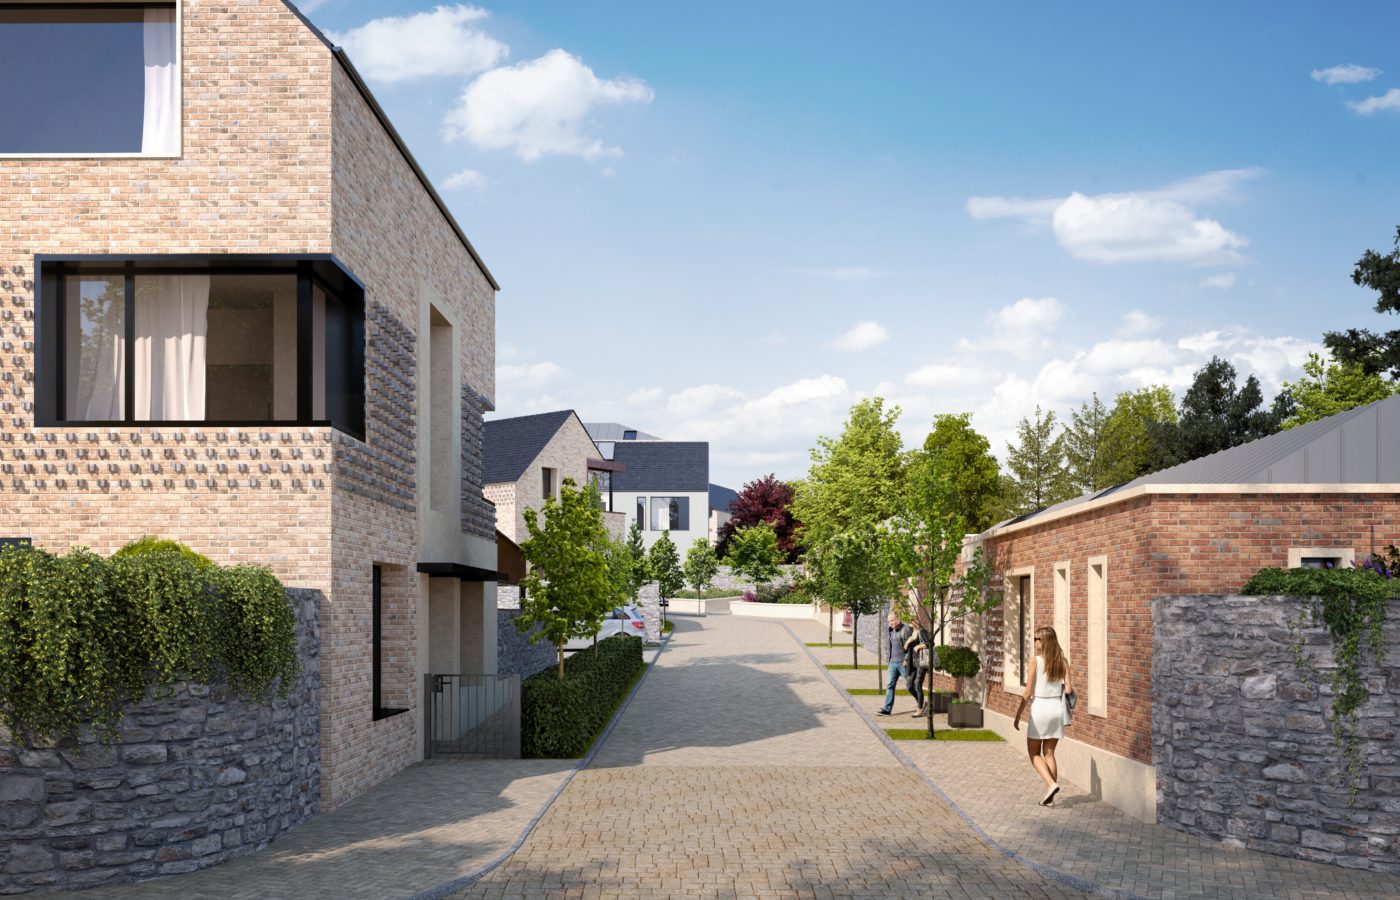 Manor View, Architectural Visualisation, CGI, 3D Animation, Street View, People walking on pavement, blue sky, road into horizon, two storey building on the left, 1 storey red brick bungalow on the right, housing estate on the horizon. https://gnet.ie/